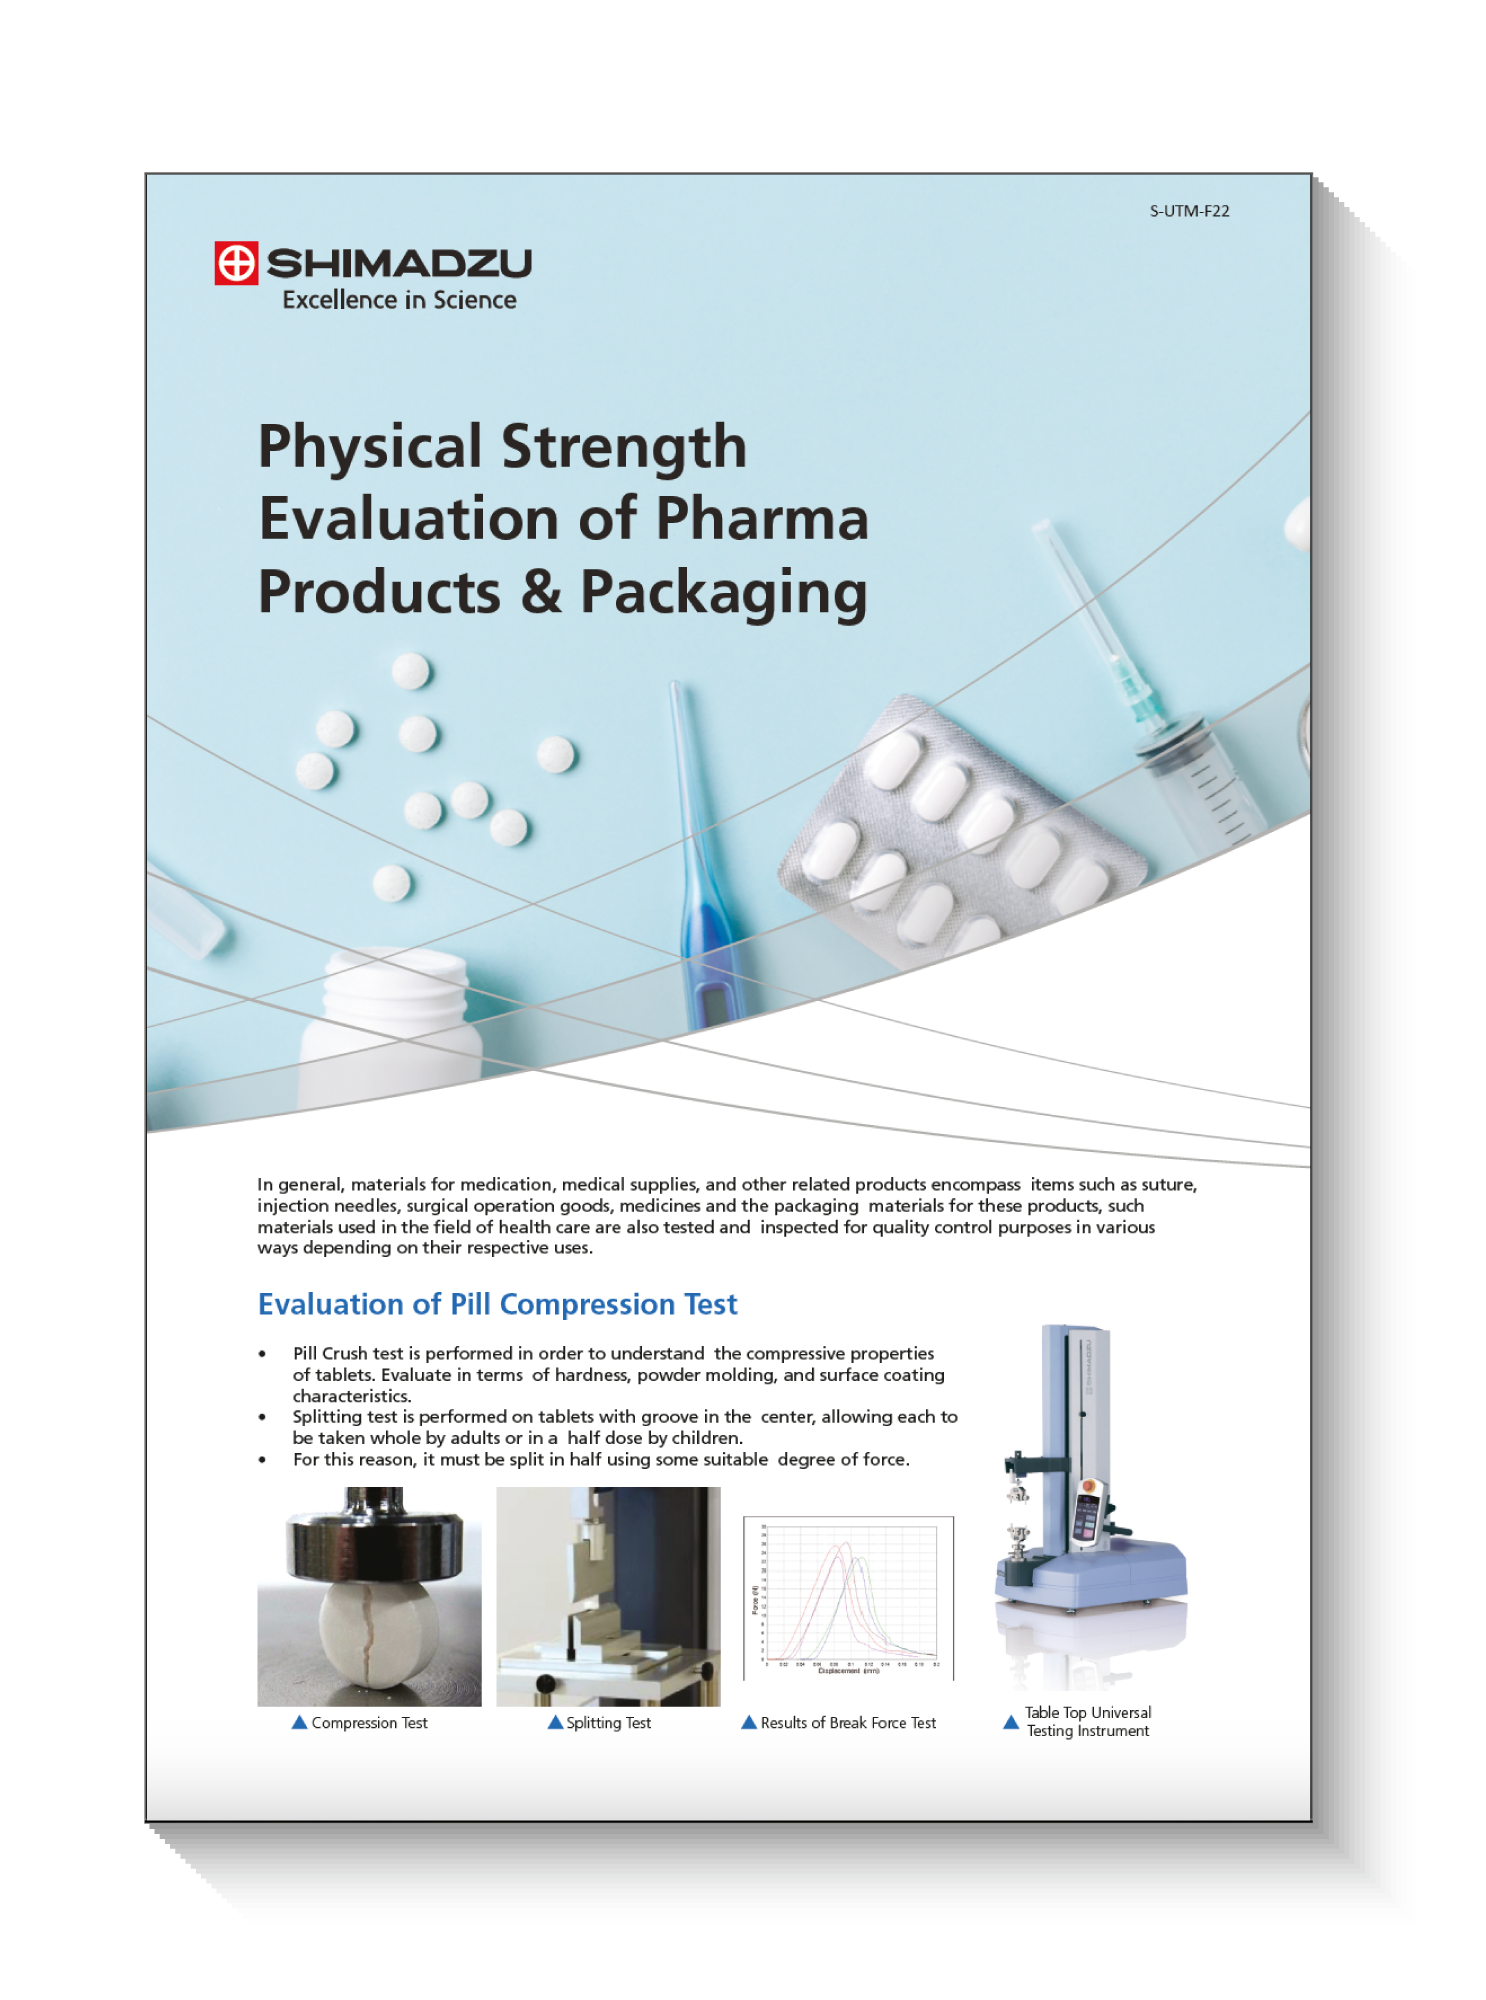 Physical Strength Evaluation of Pharma Products and Packaging